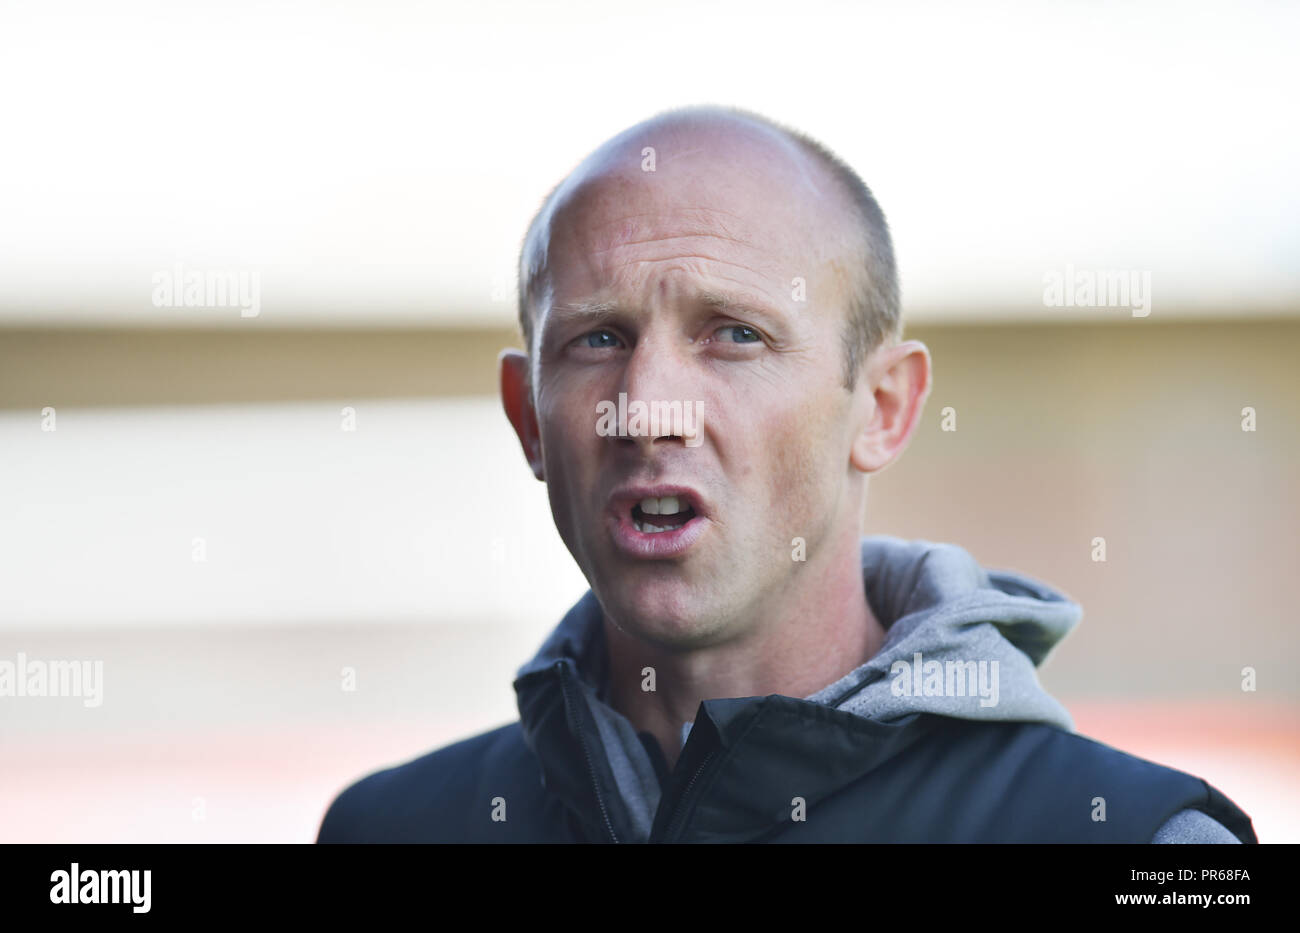 Yeovil manager Darren Way during the Sky Bet League 2 match between Crawley Town and Yeovil Town at the Broadfield Stadium , Crawley , 29 Sept 2018 - Editorial use only. No merchandising. For Football images FA and Premier League restrictions apply inc. no internet/mobile usage without FAPL license - for details contact Football Dataco Stock Photo